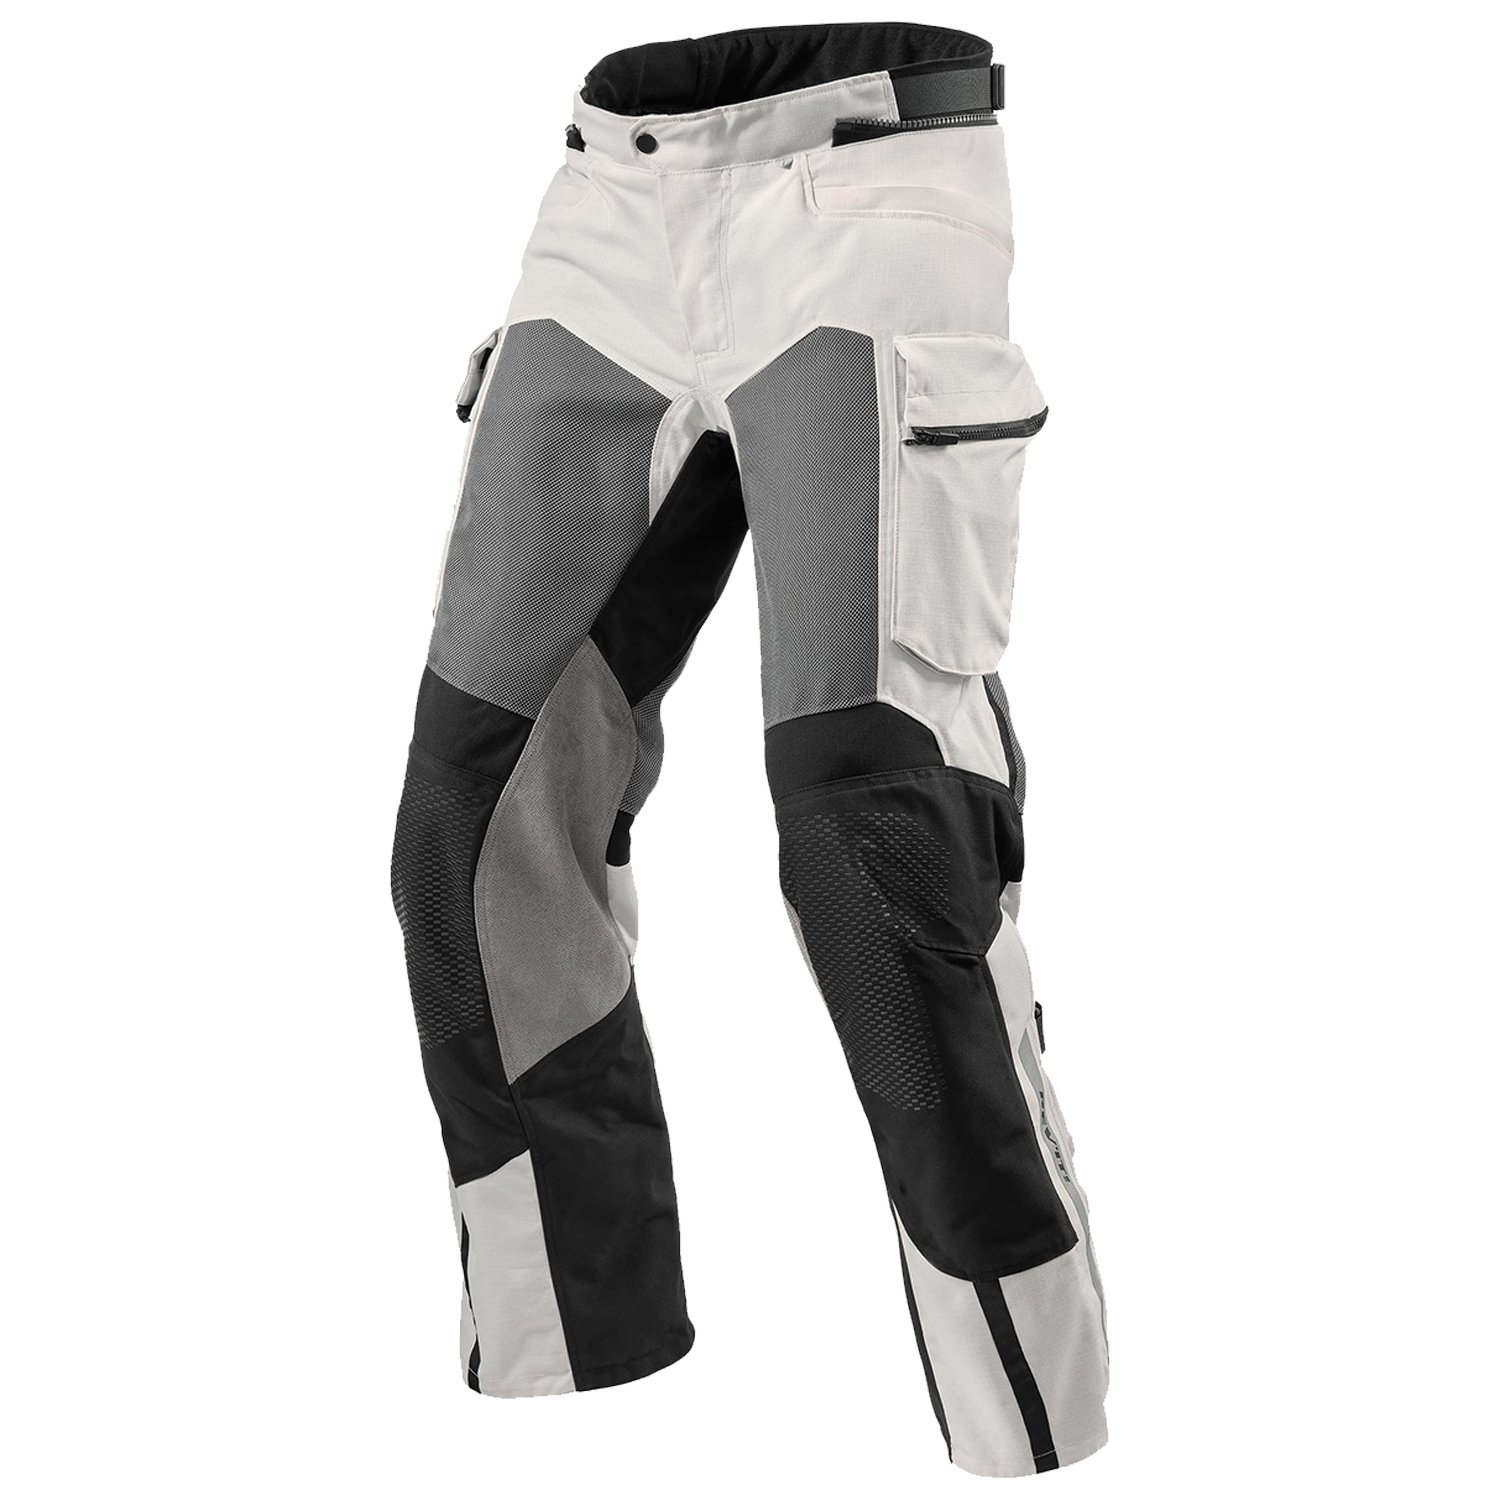 Image of REV'IT! Cayenne 2 Silver Motorcycle Pants Talla S